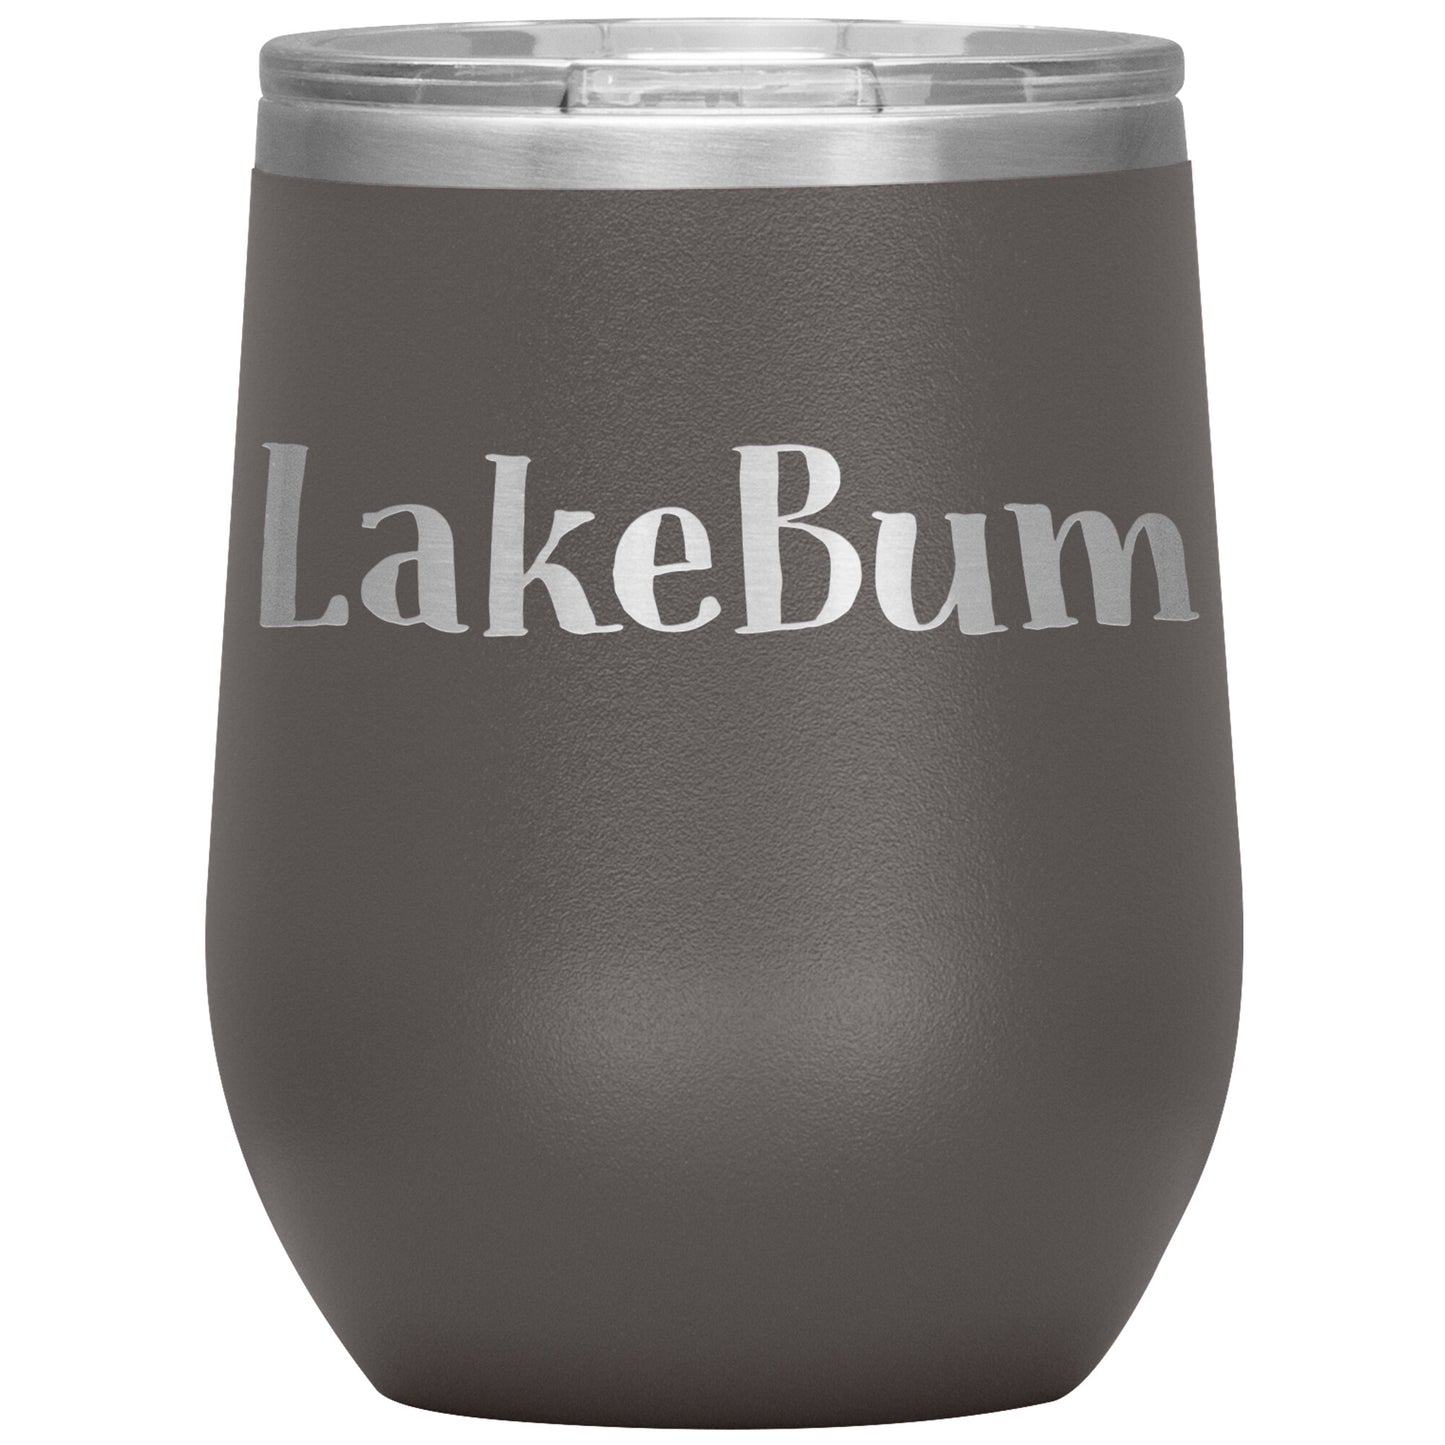 Lake Bum 12oz Wine Tumbler - Funny Stemless Cup With Lid